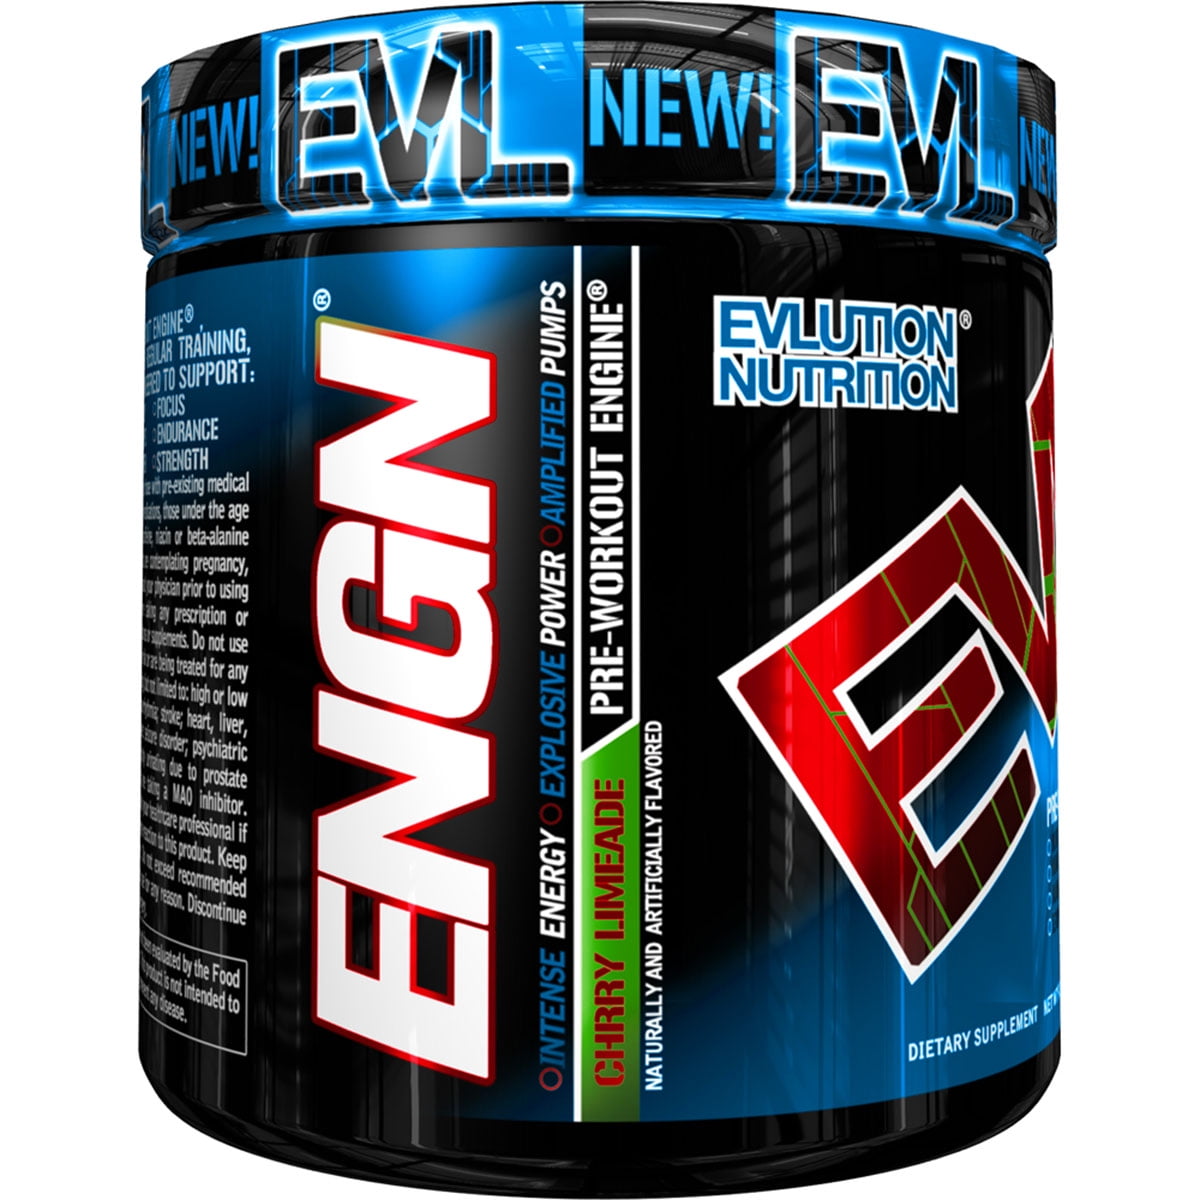 6 Day Evlution Pre Workout Review for Beginner